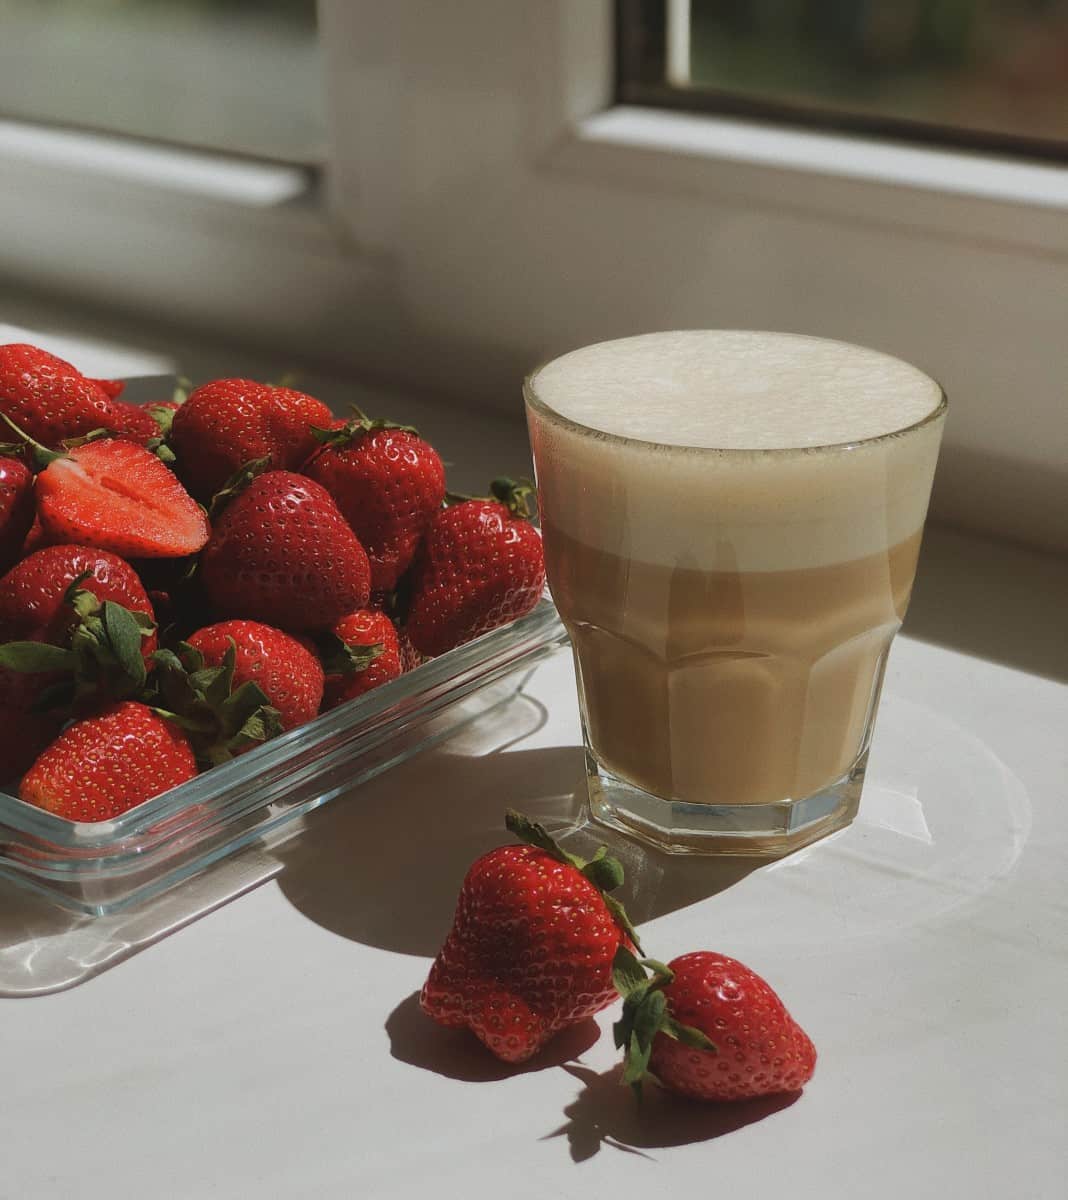 Strawberries and cup of coffee cream